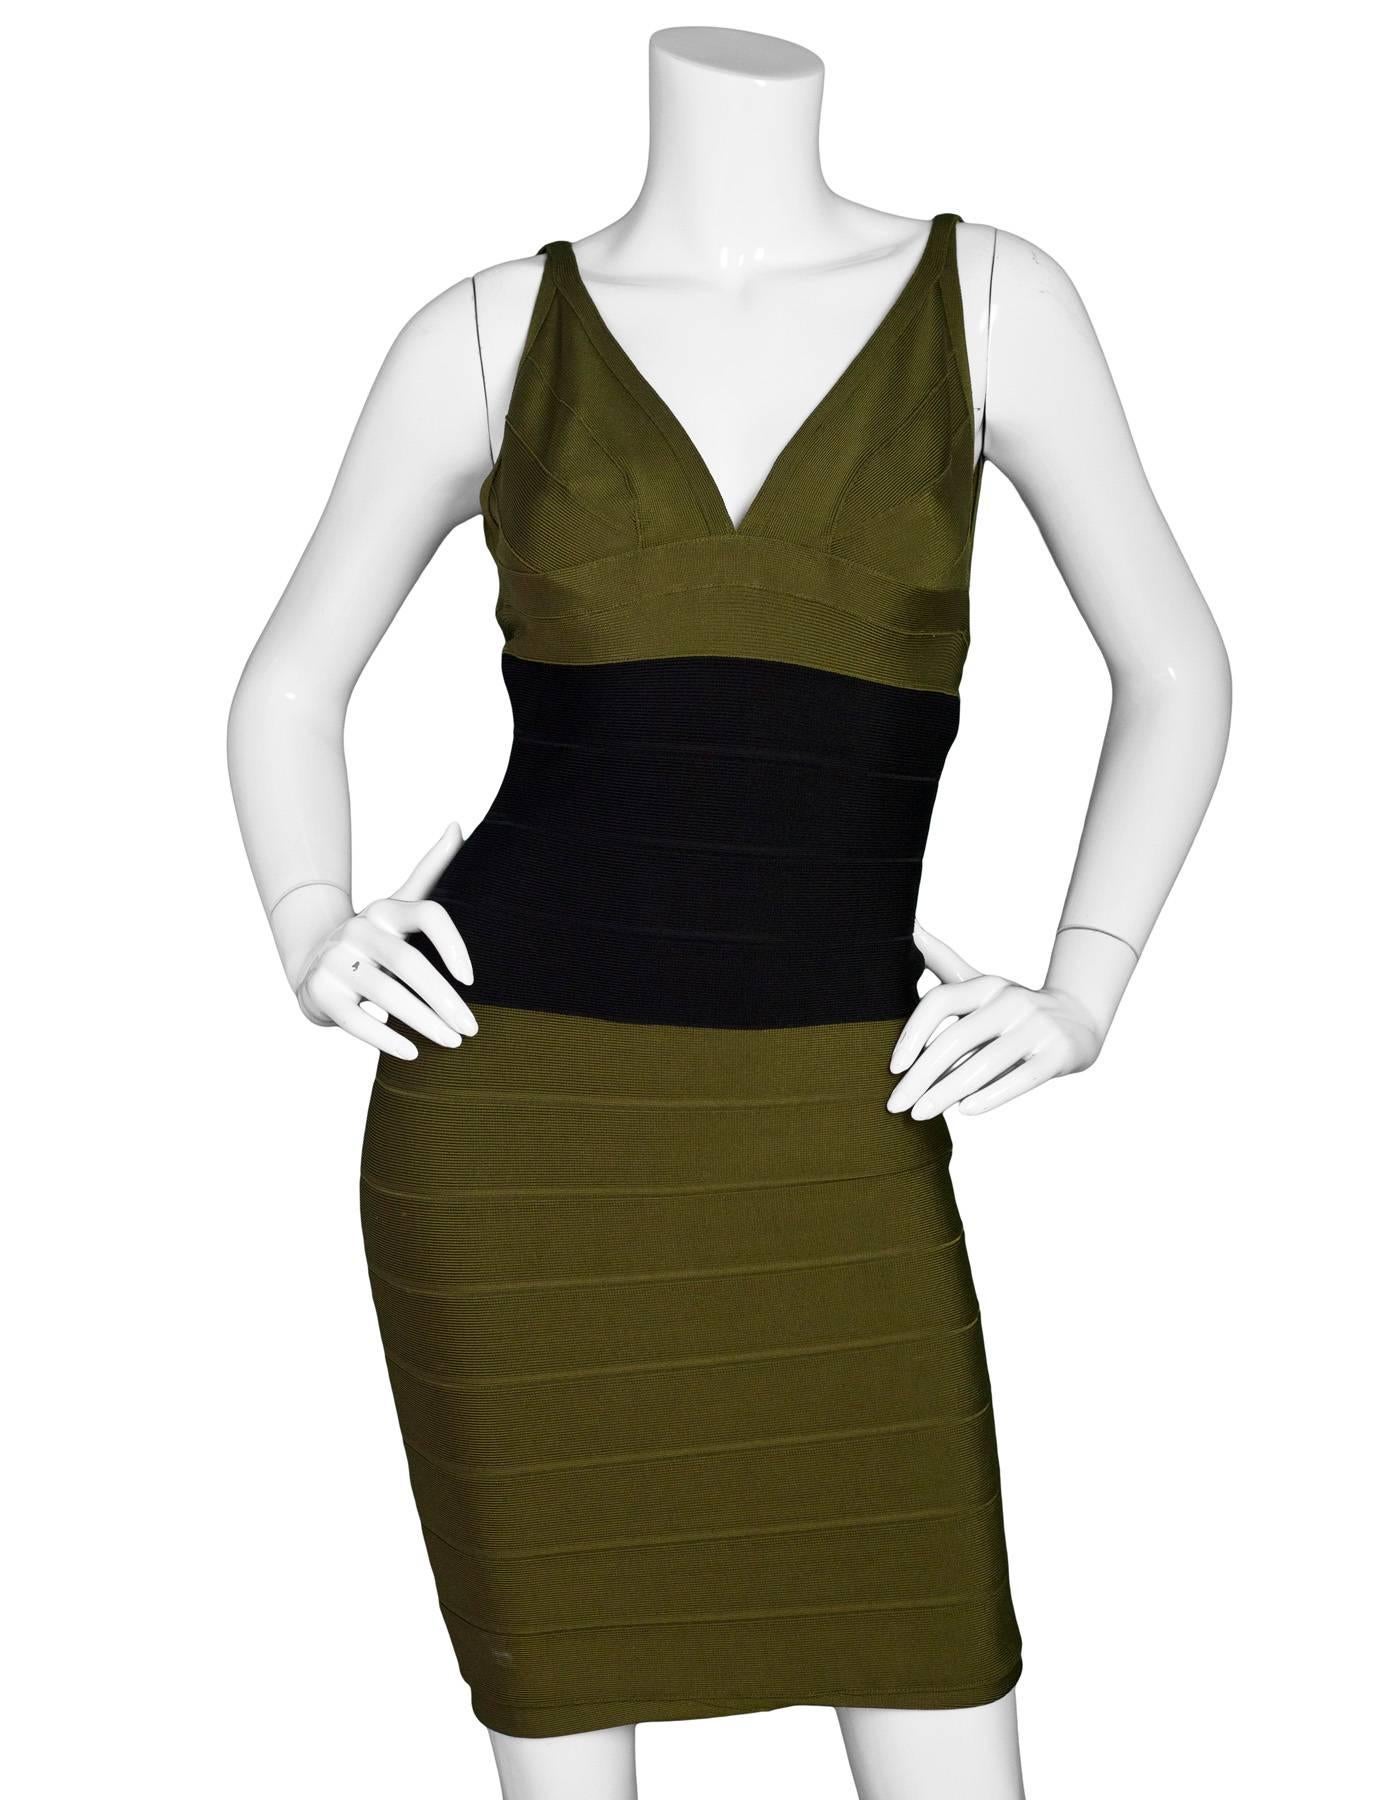 Herve Leger Olive Green & Black Bandage Dress Sz M

Made In: China
Color: Olive green, black
Composition: 90% Rayon, 9% Nylon, 1% Spandex
Lining: None
Closure/Opening: Zip closure at back
Overall Conditon: Excellent pre-owned condition with the